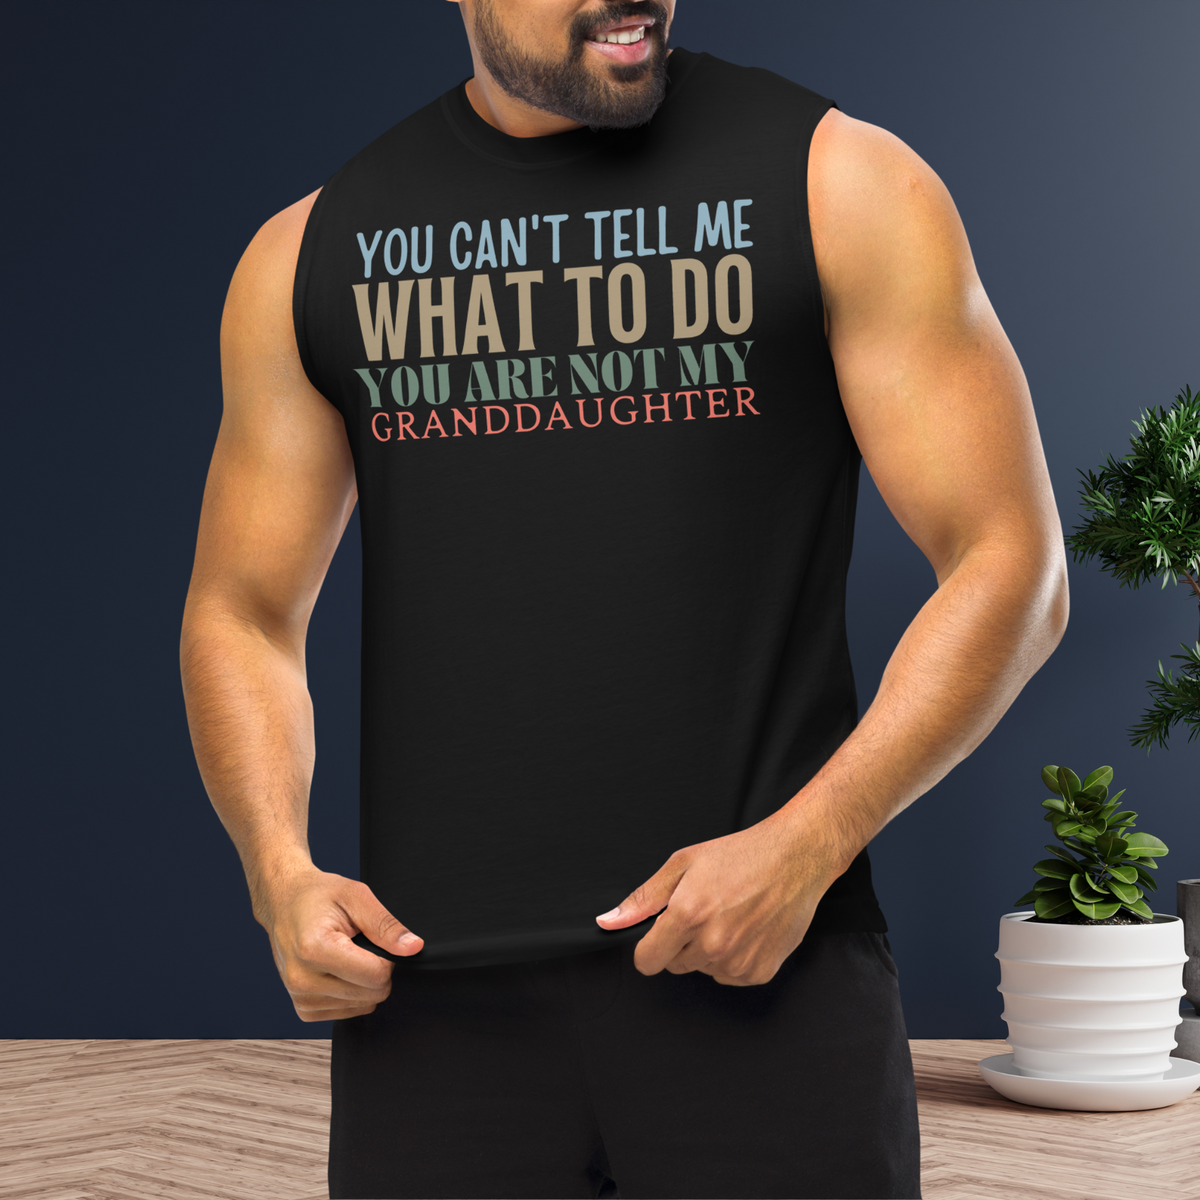 Granddad muscle shirt, sleeveless shirt, fathers day shirt, funny mens shirt, sweatshirt, gift for him, gift for her, funny grandma tee, funny granddad tee, new papa shirt, father sweatshirt, you can't tell me what to do you are not my granddaughter, new granddady shirt